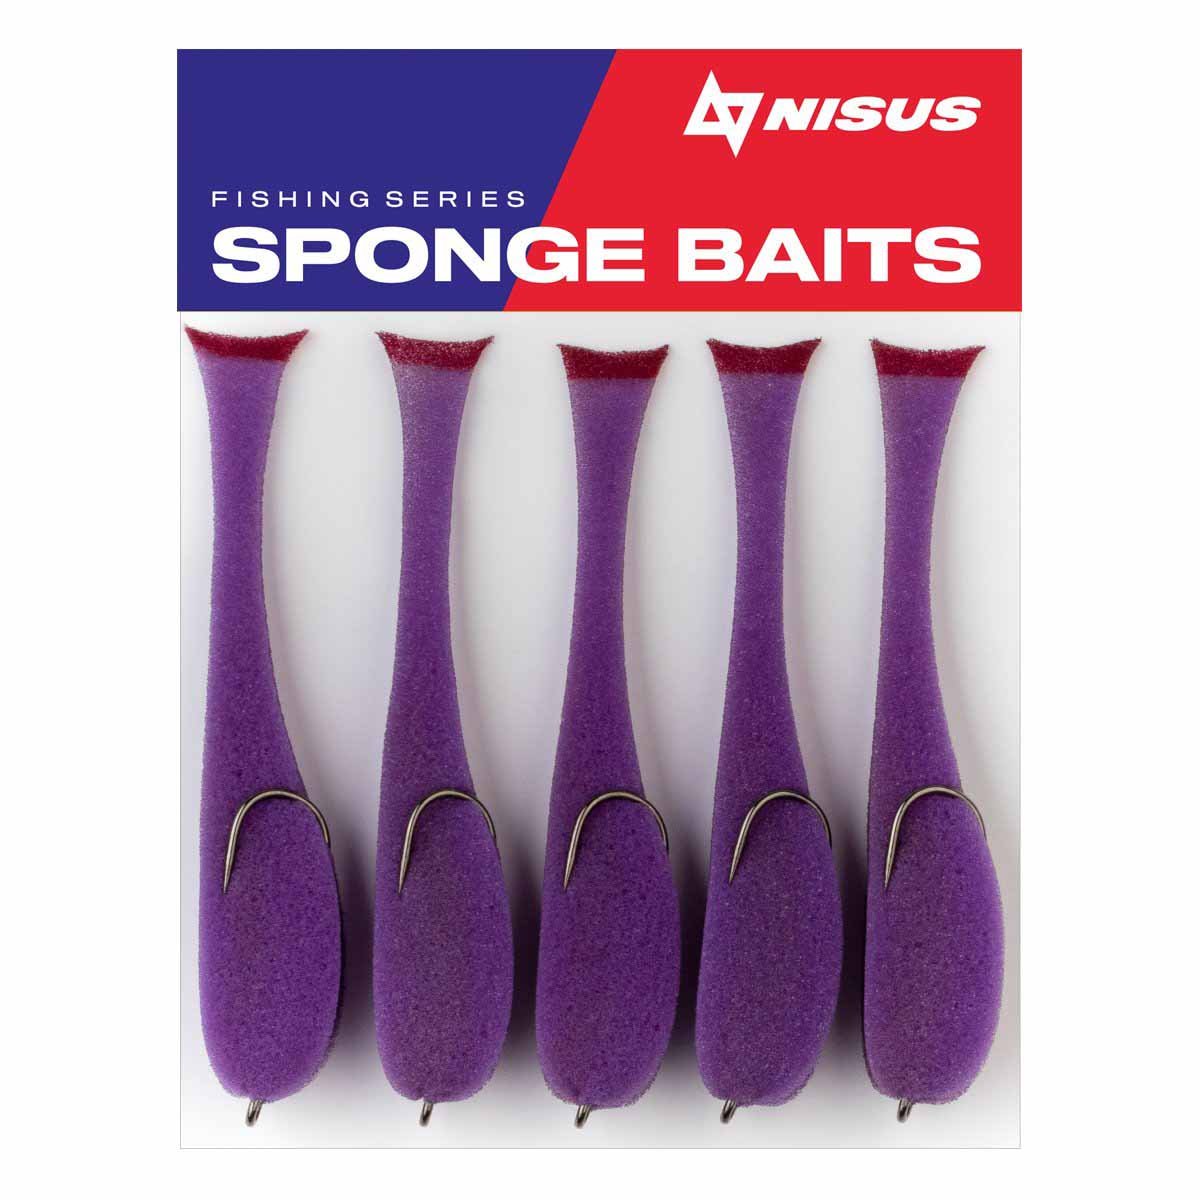 5 Sponge Bait with A Double Hook for Predatory Fish, Multi-Colored, 5 Pcs, Yellow&Red